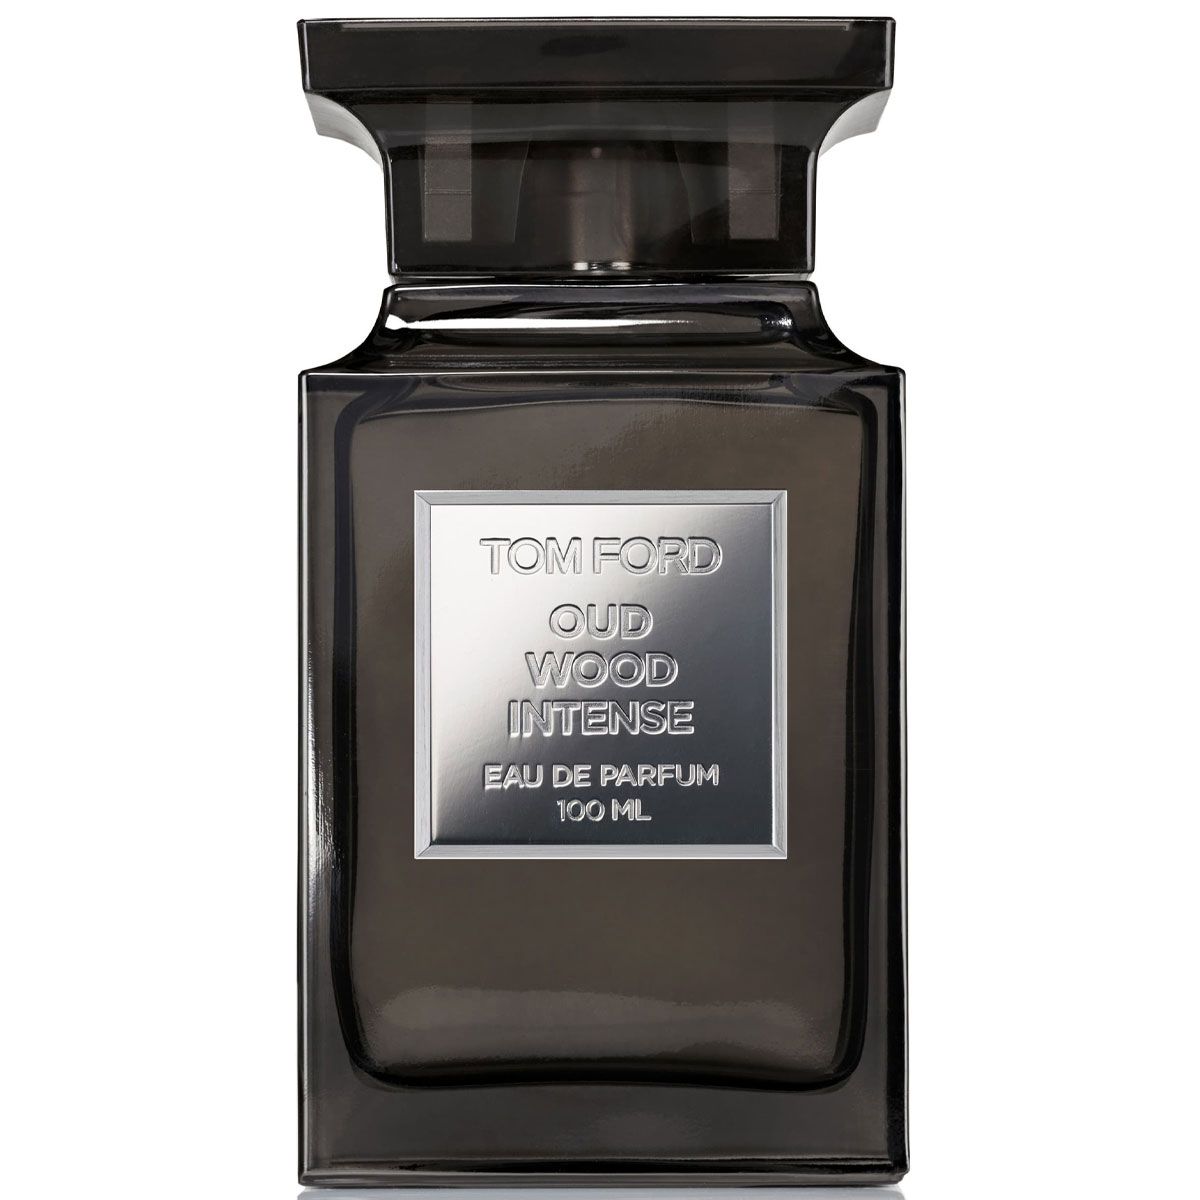  Tom Ford Oud Wood Intense 